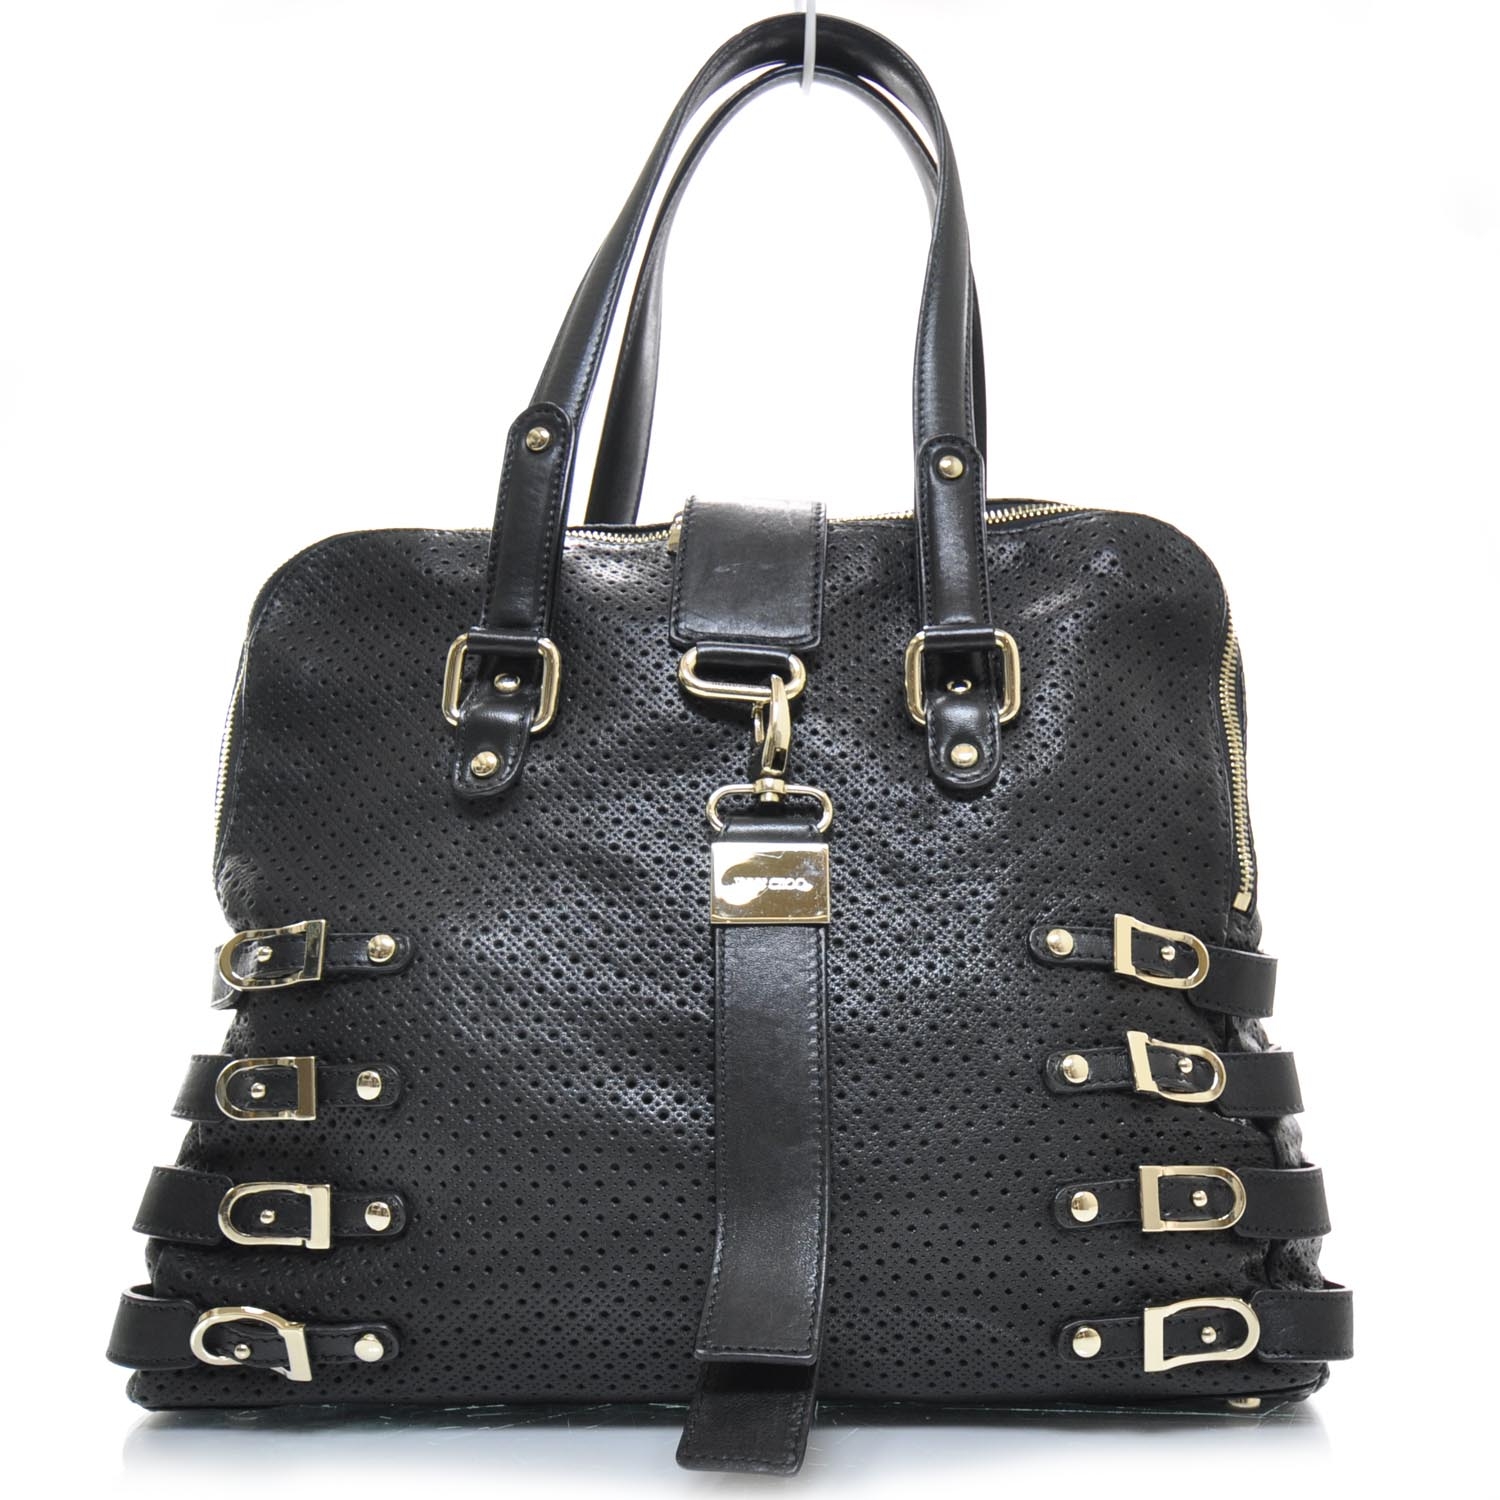 JIMMY CHOO Leather Perforated Blythe Tote Black 22799